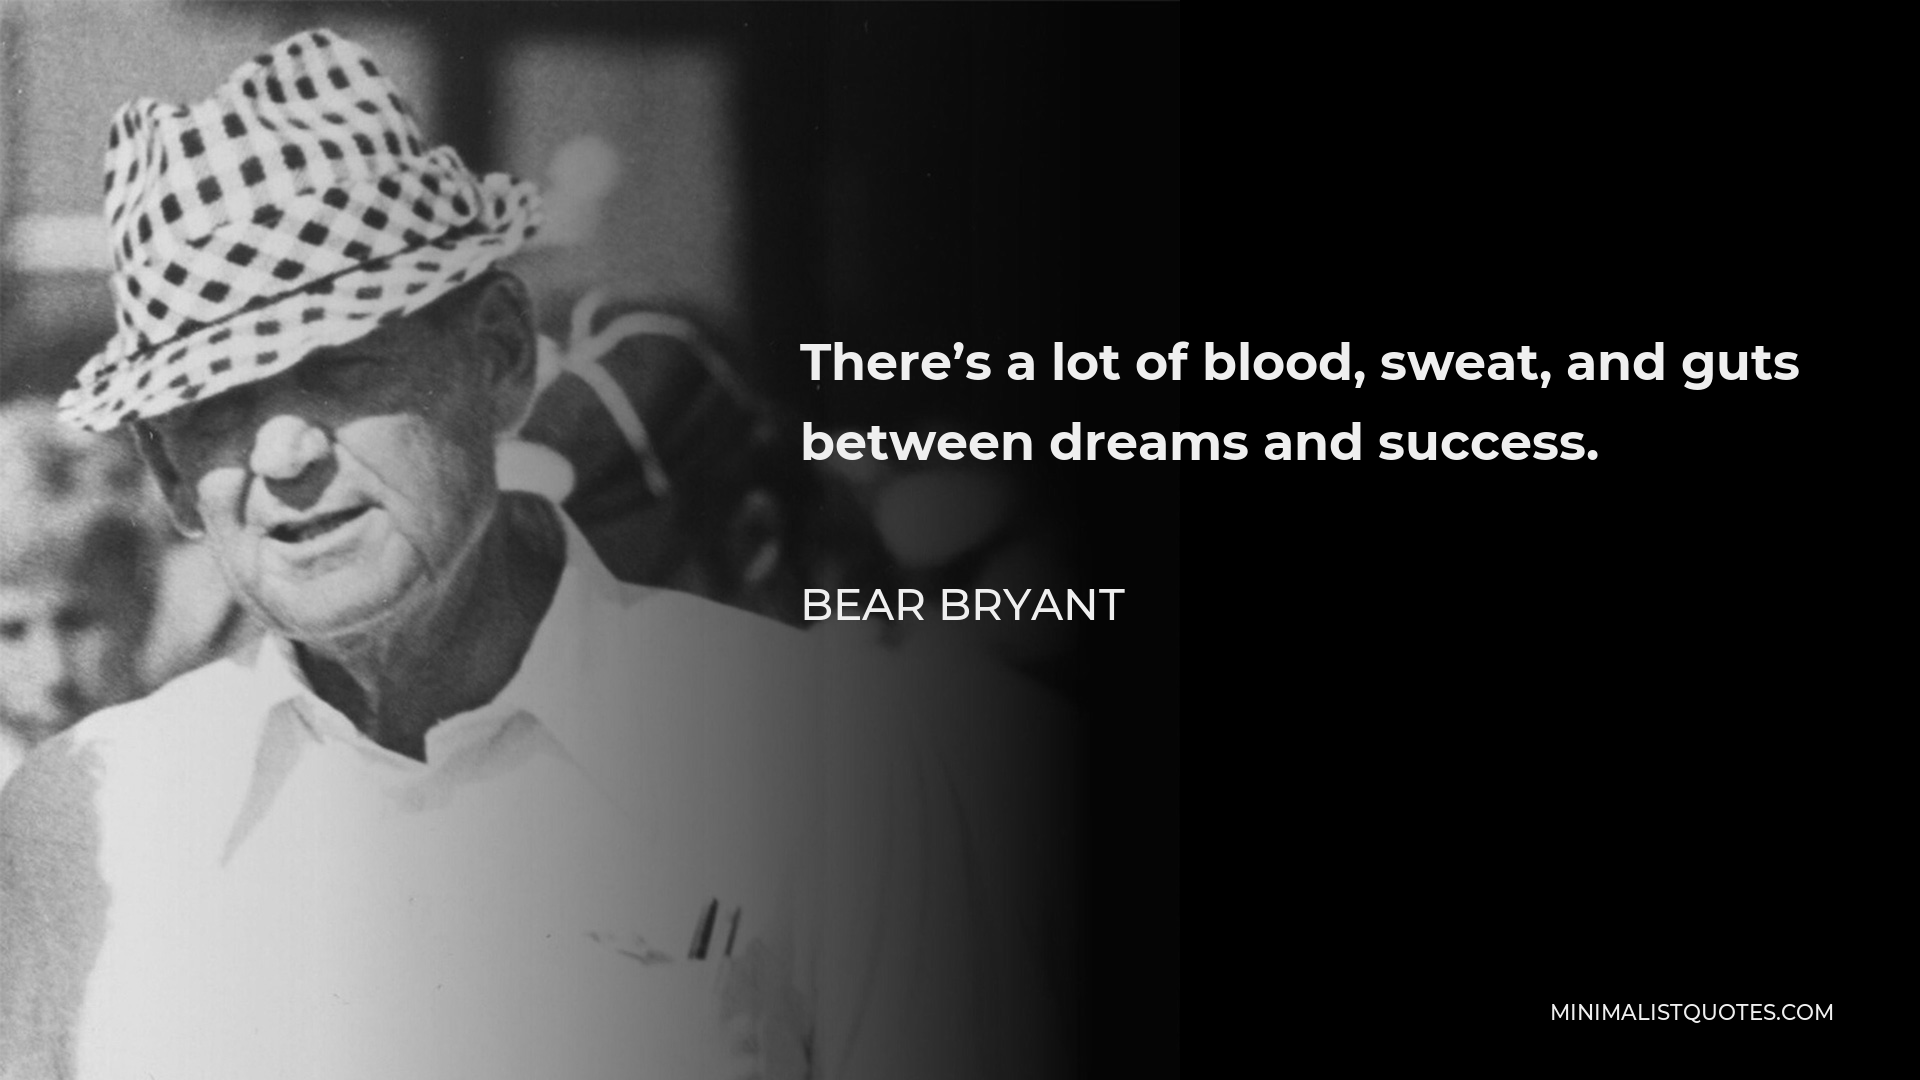 Bear Bryant Quote - There’s a lot of blood, sweat, and guts between dreams and success.